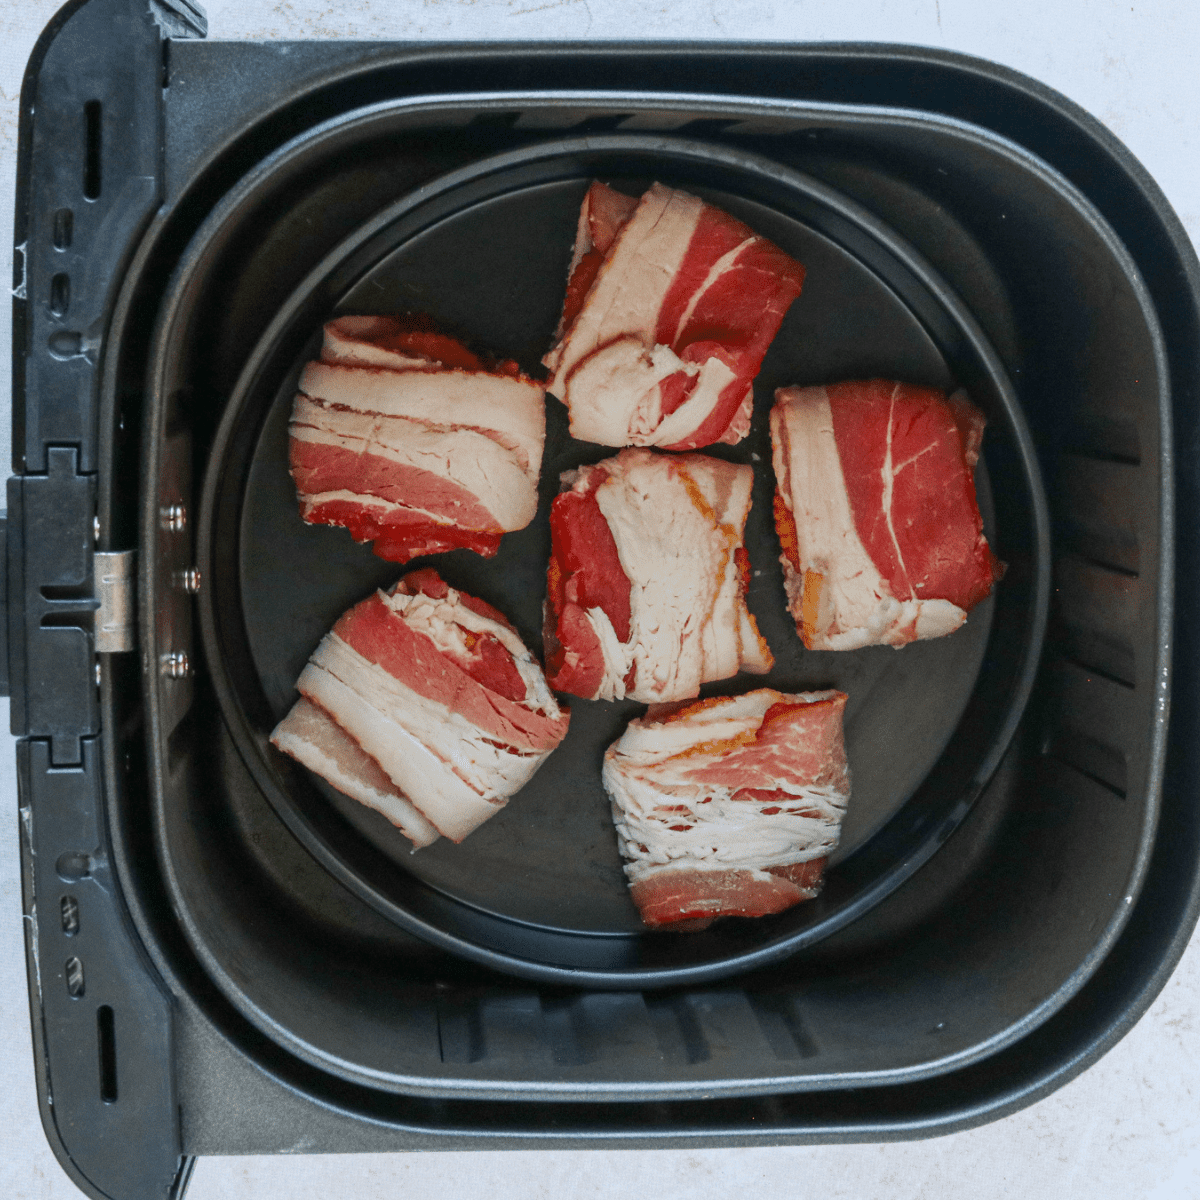 How To Make Air Fryer Bacon-Wrapped Crackers